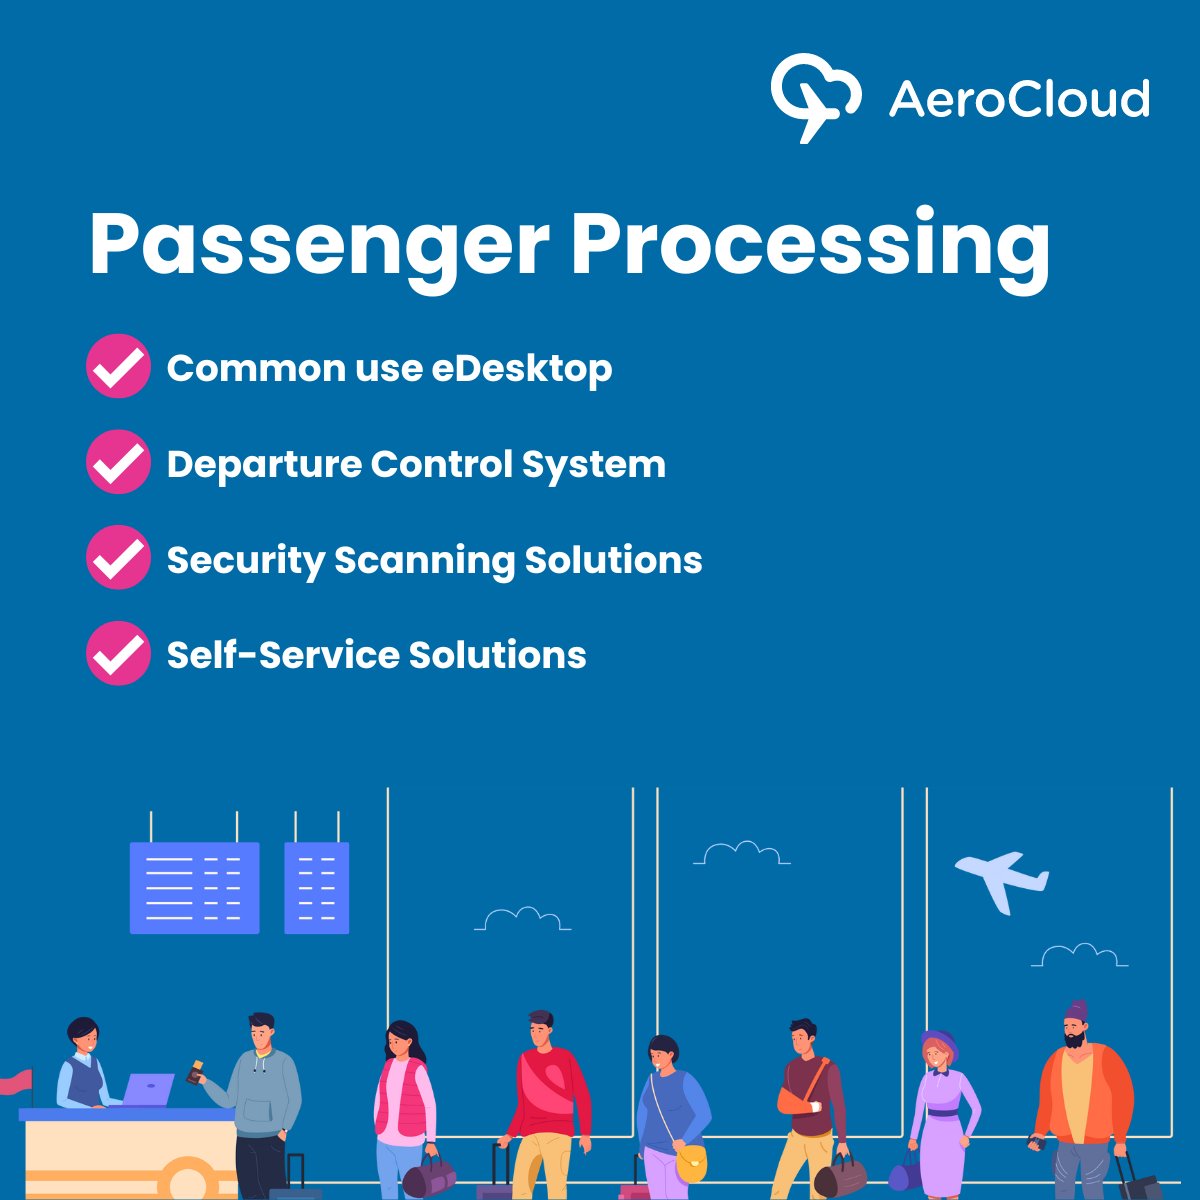 @aerocloudsys develops cutting-edge Common Use Passenger Processing Solutions for #airports #FBOs #GroundHandlers & #airlines
Designed to streamline movement from arrival to boarding, our solutions will revolutionize your #passenger processing workflow!
bit.ly/3PCZrMN